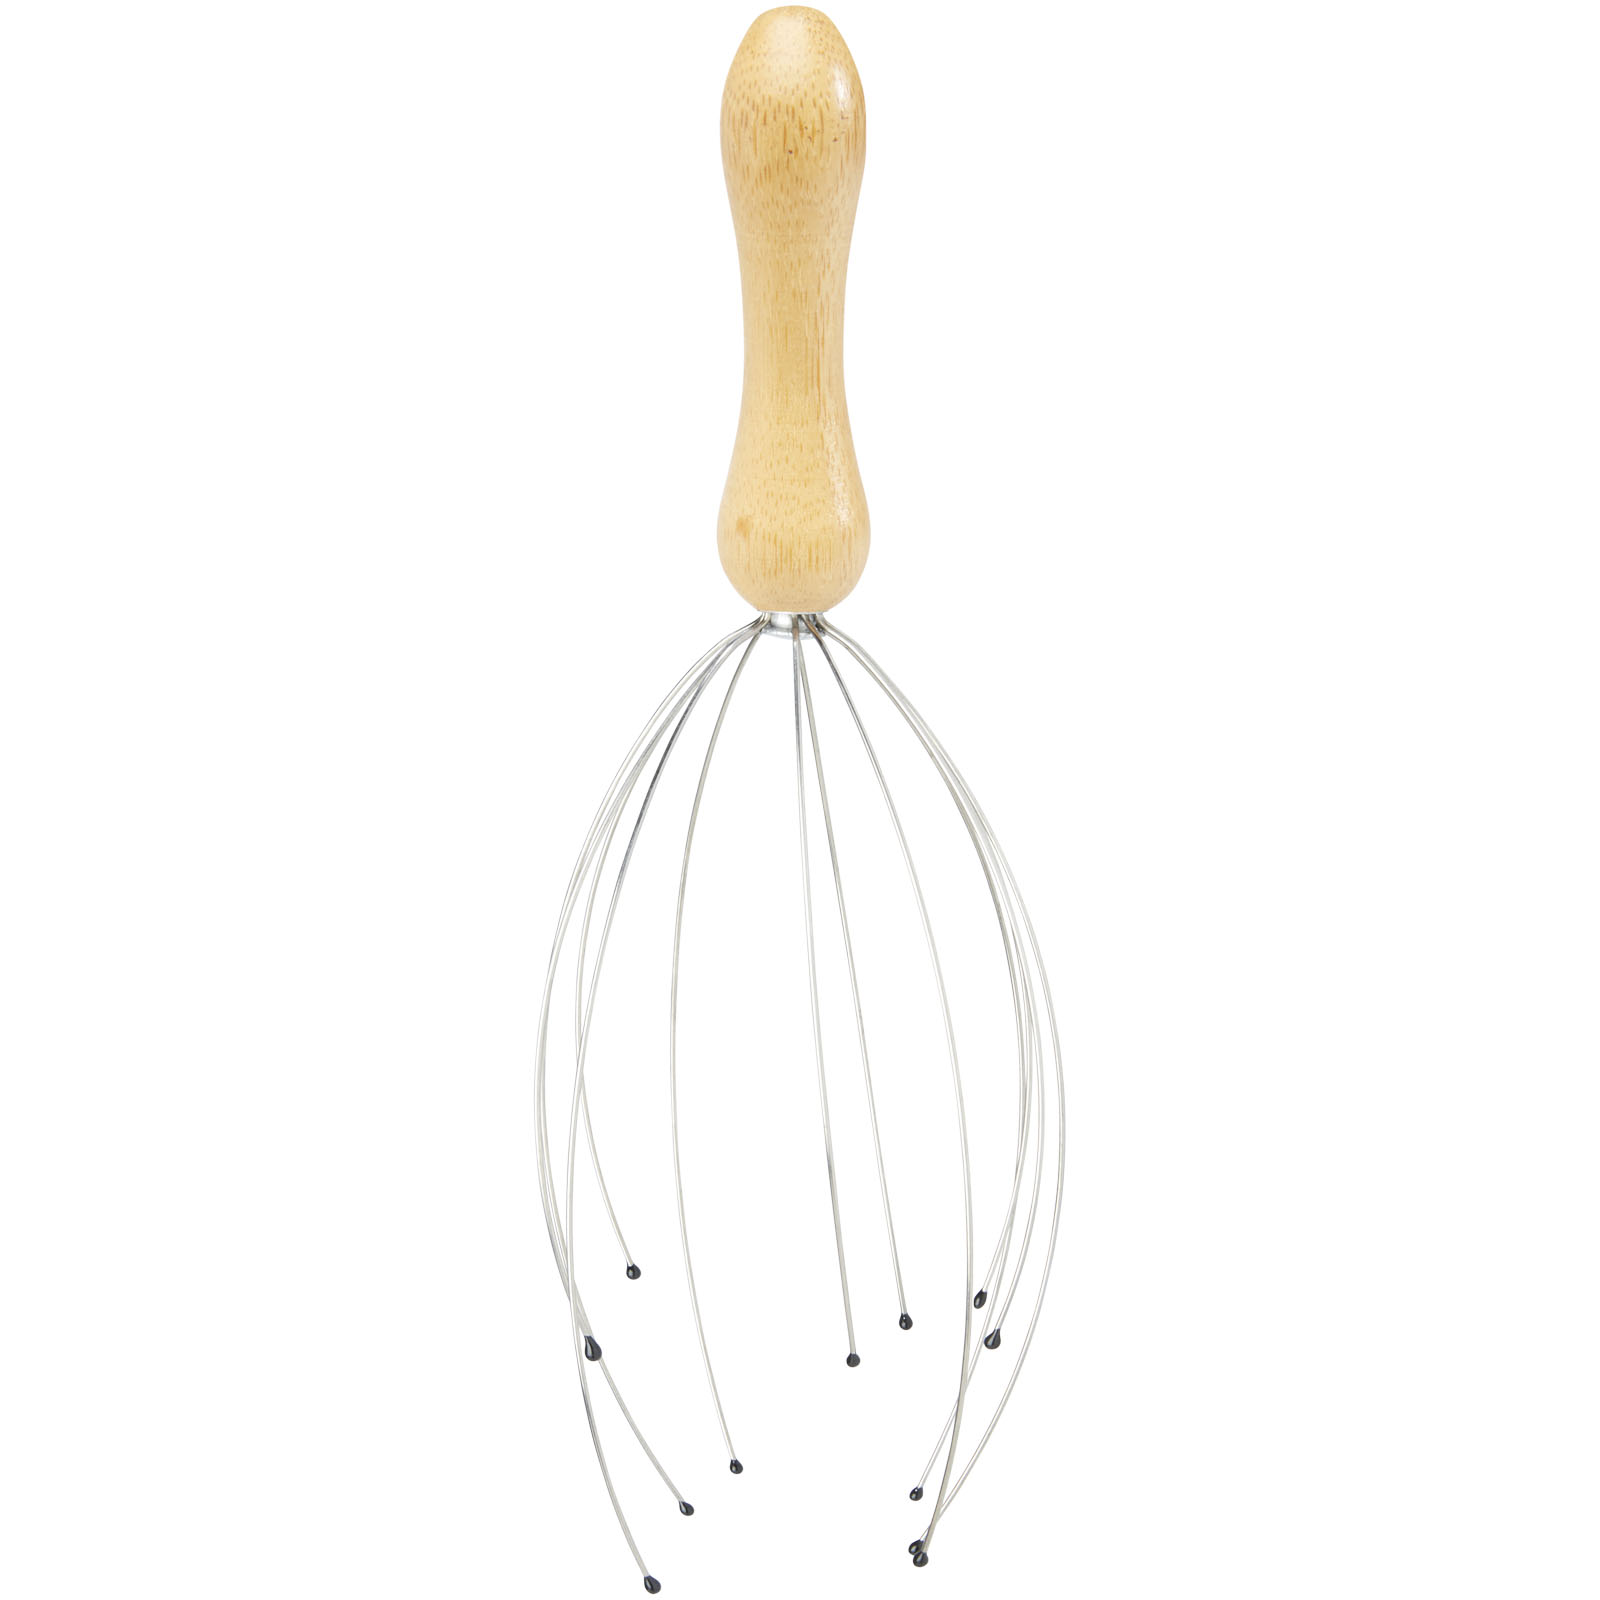 Health & Personal Care - Hator bamboo head massager